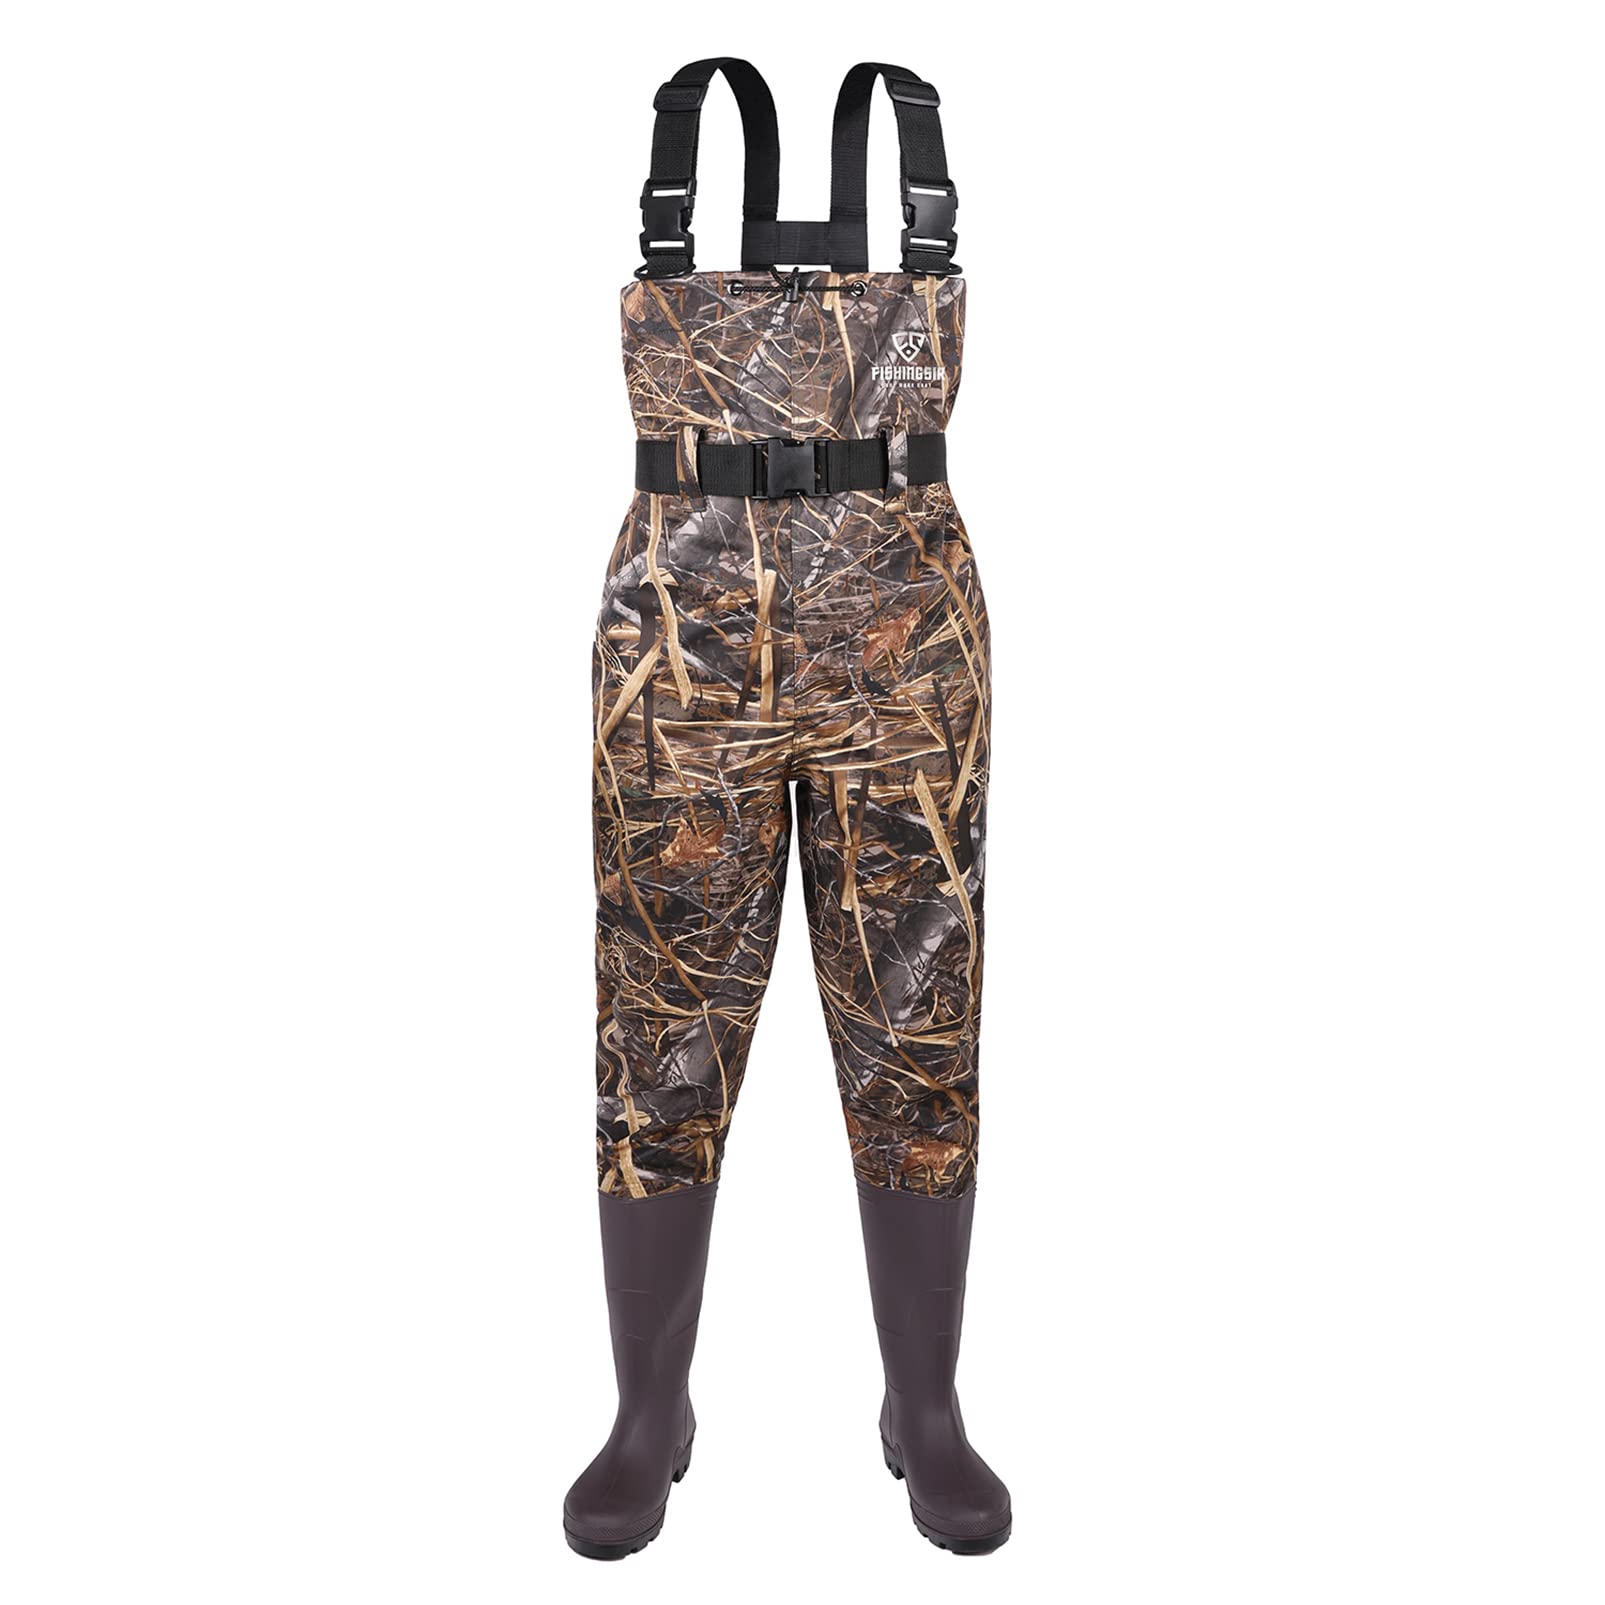 Magreel Chest Waders Hunting Fishing Waders for Men Women with Boots  Waterpro 